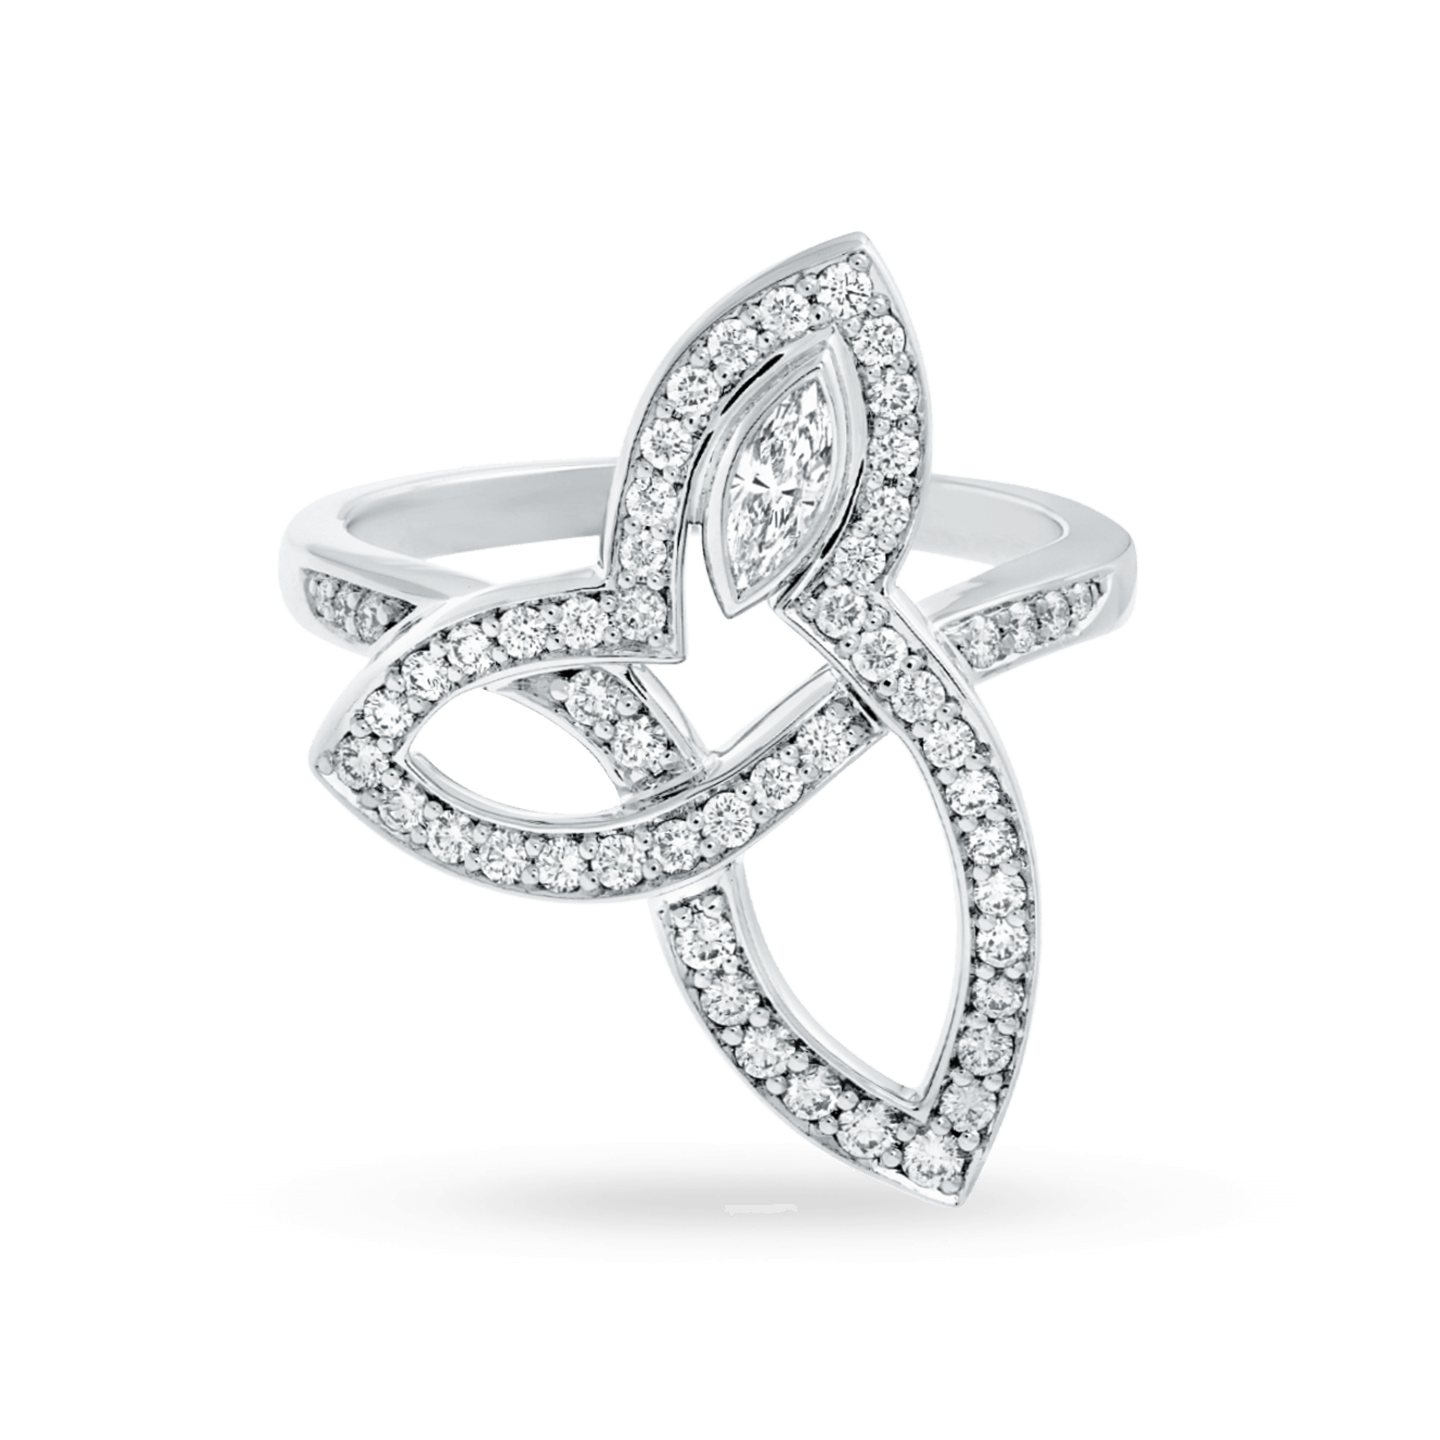 Lily Cluster Diamond Ring in Platinum, Product Image 1